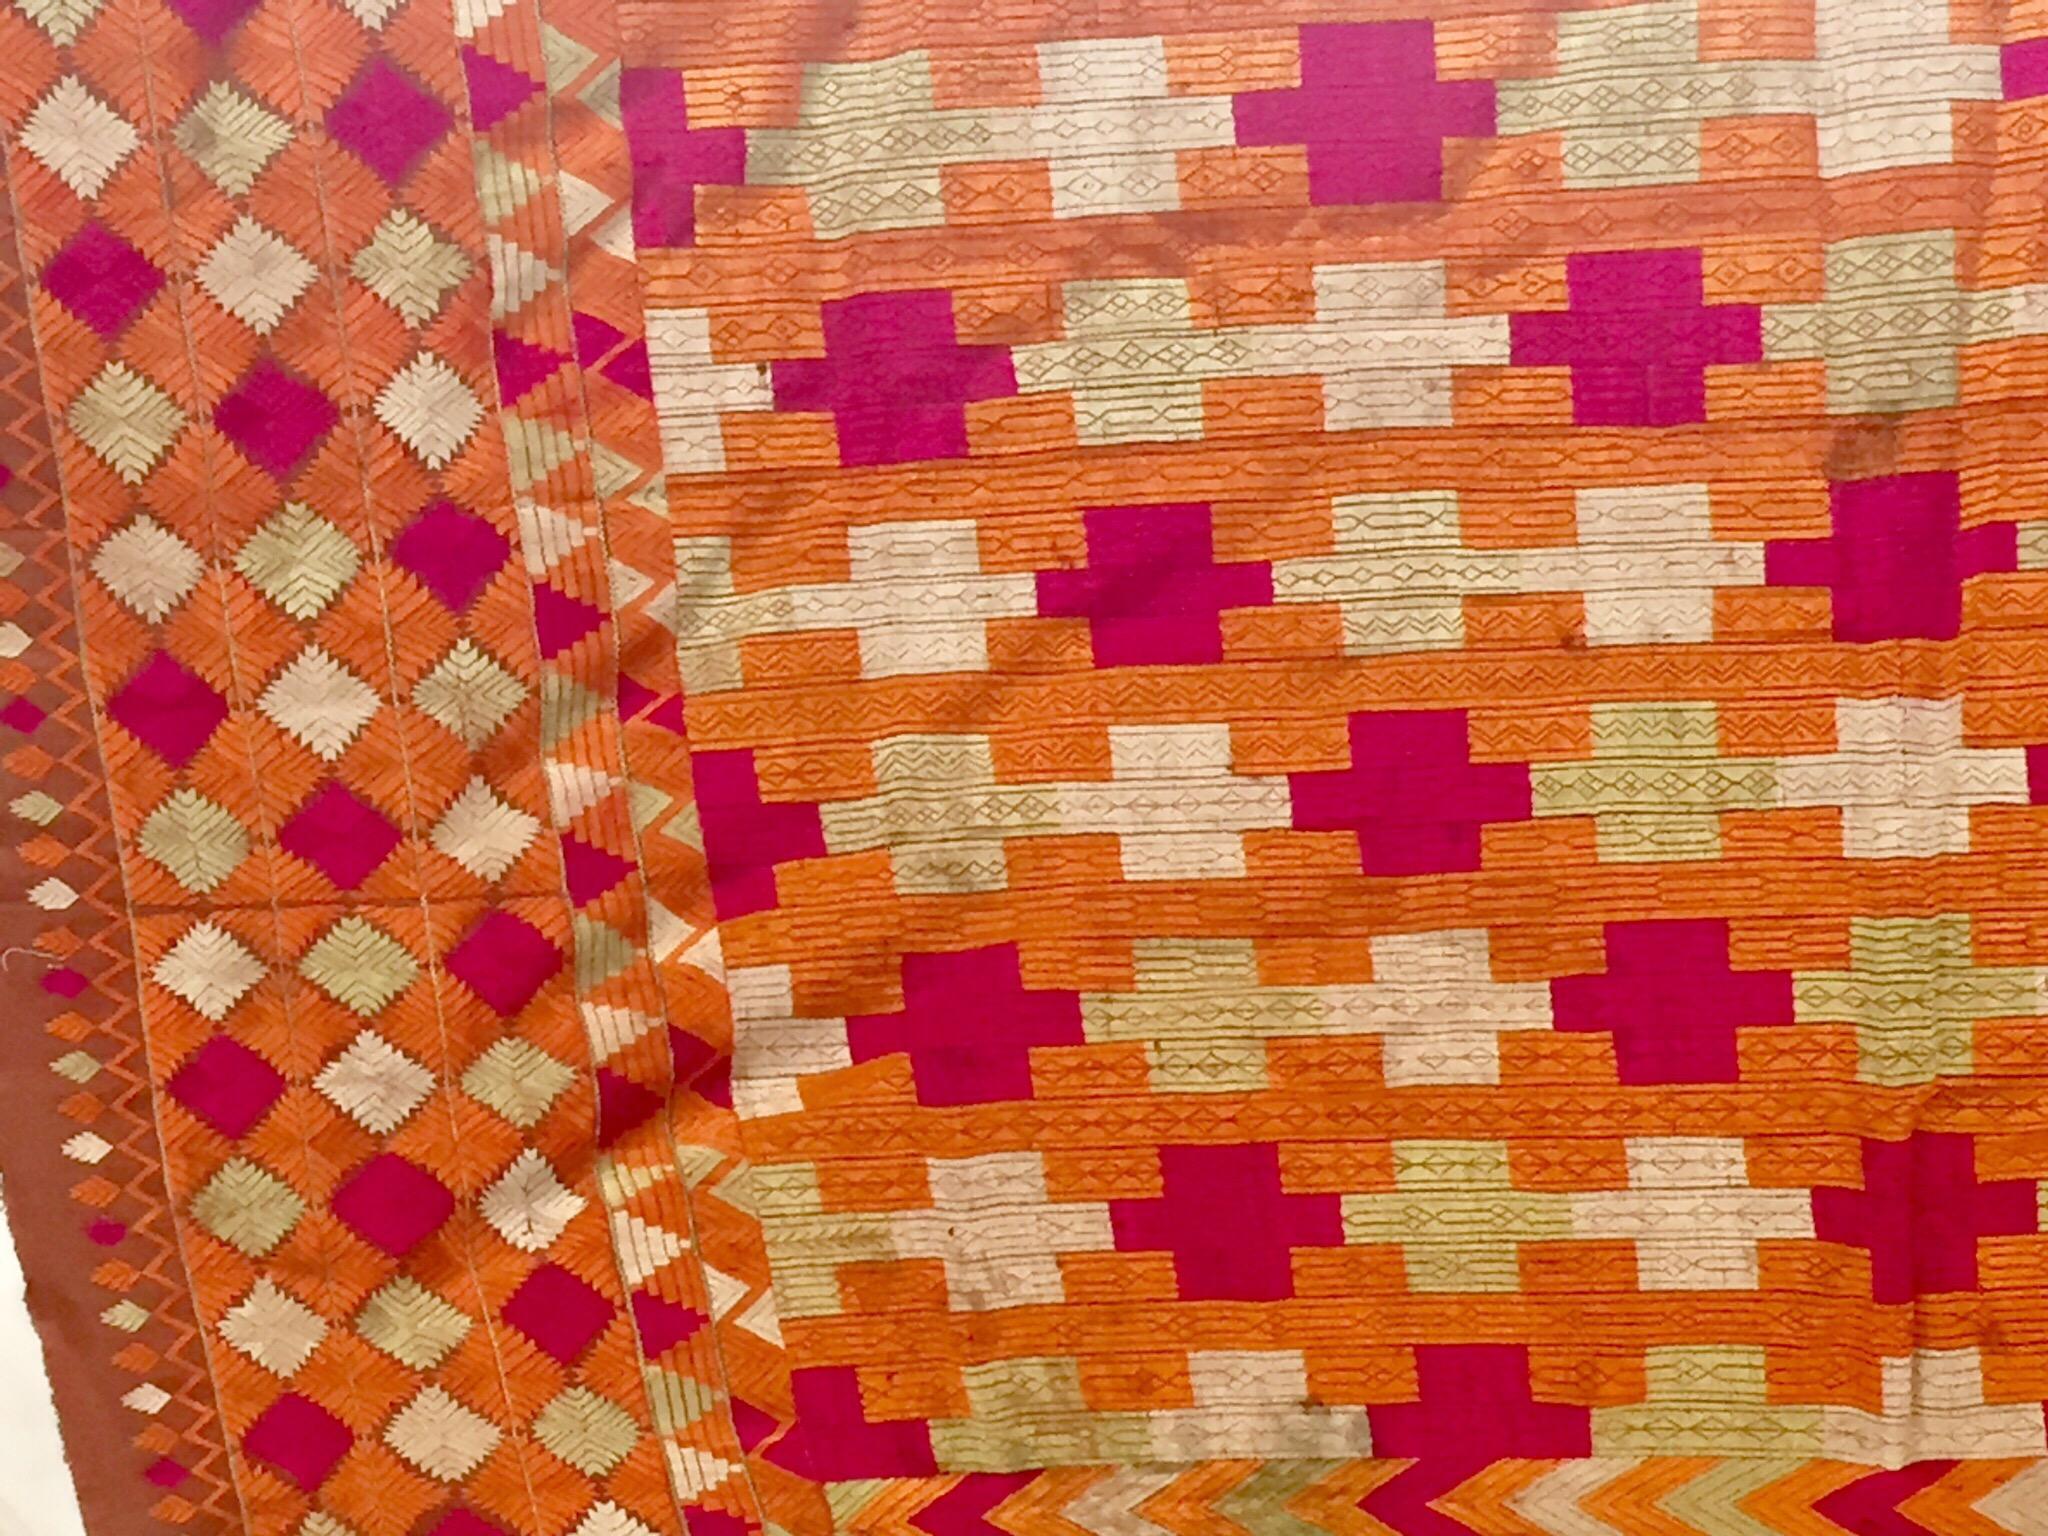 Phulkari Bawan Bagh Wedding Shawl, Silk Embroidery on Cotton, Punjab India In Good Condition For Sale In North Hollywood, CA